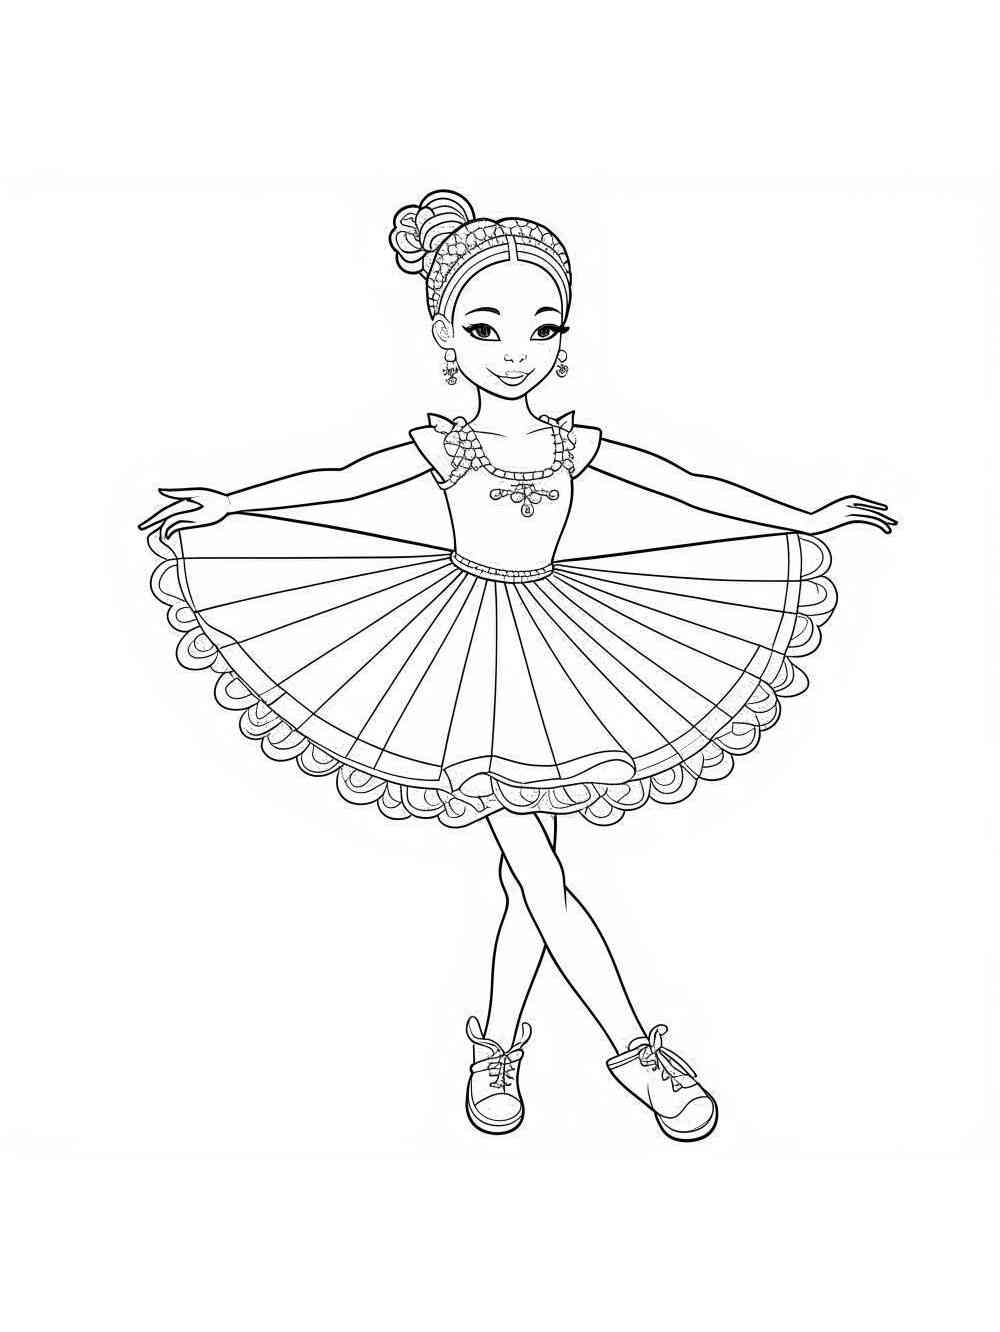 Ballerina coloring pages. Download and print Ballerina coloring pages.